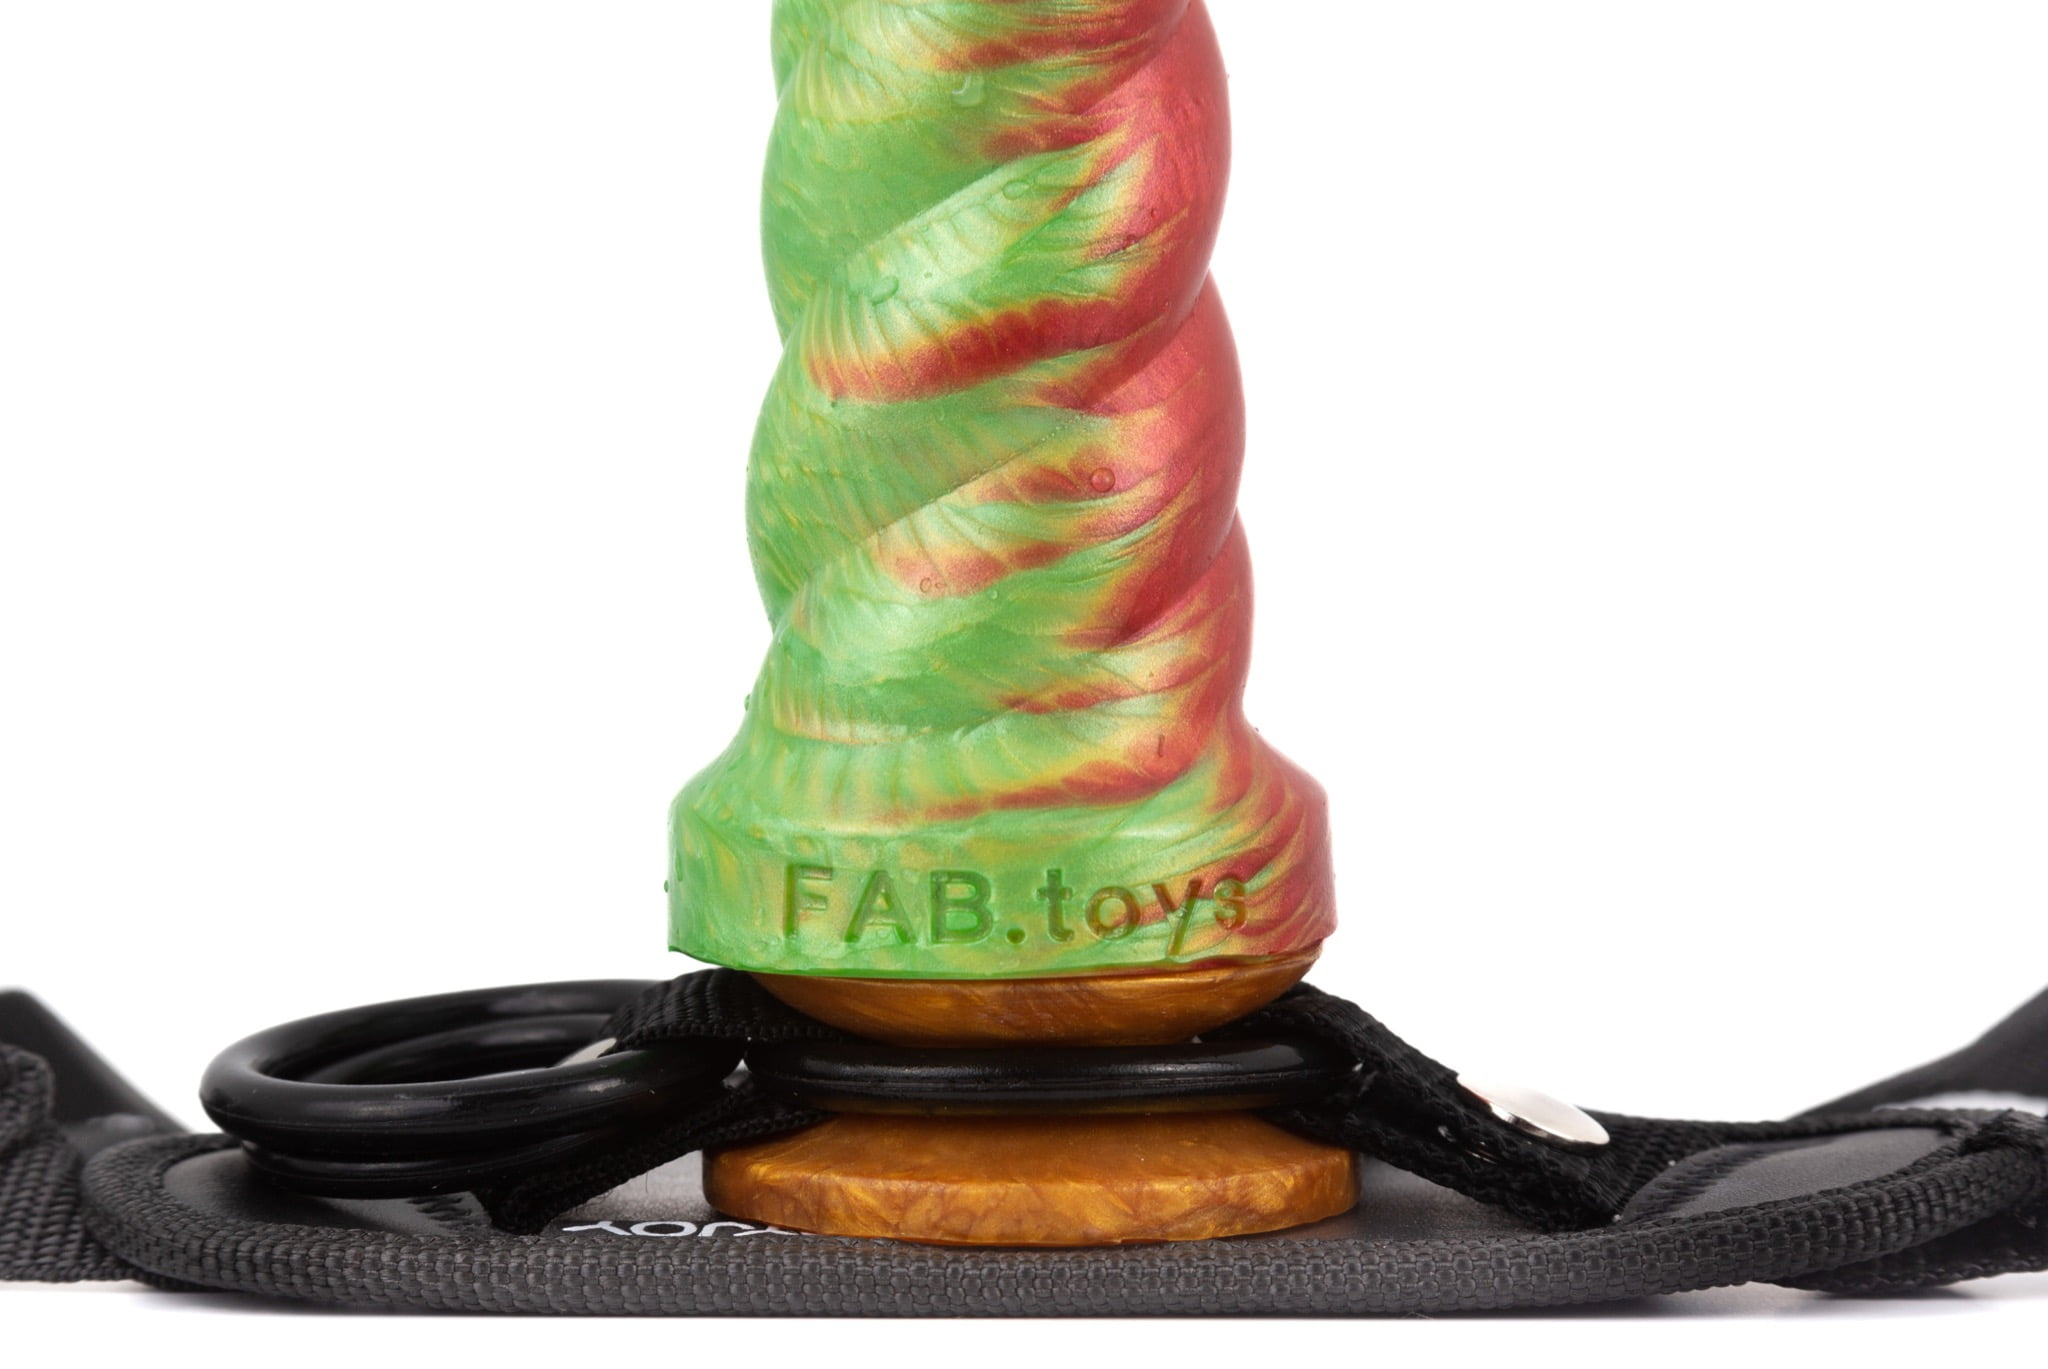 FAB.toys - Harness addon - suction cup